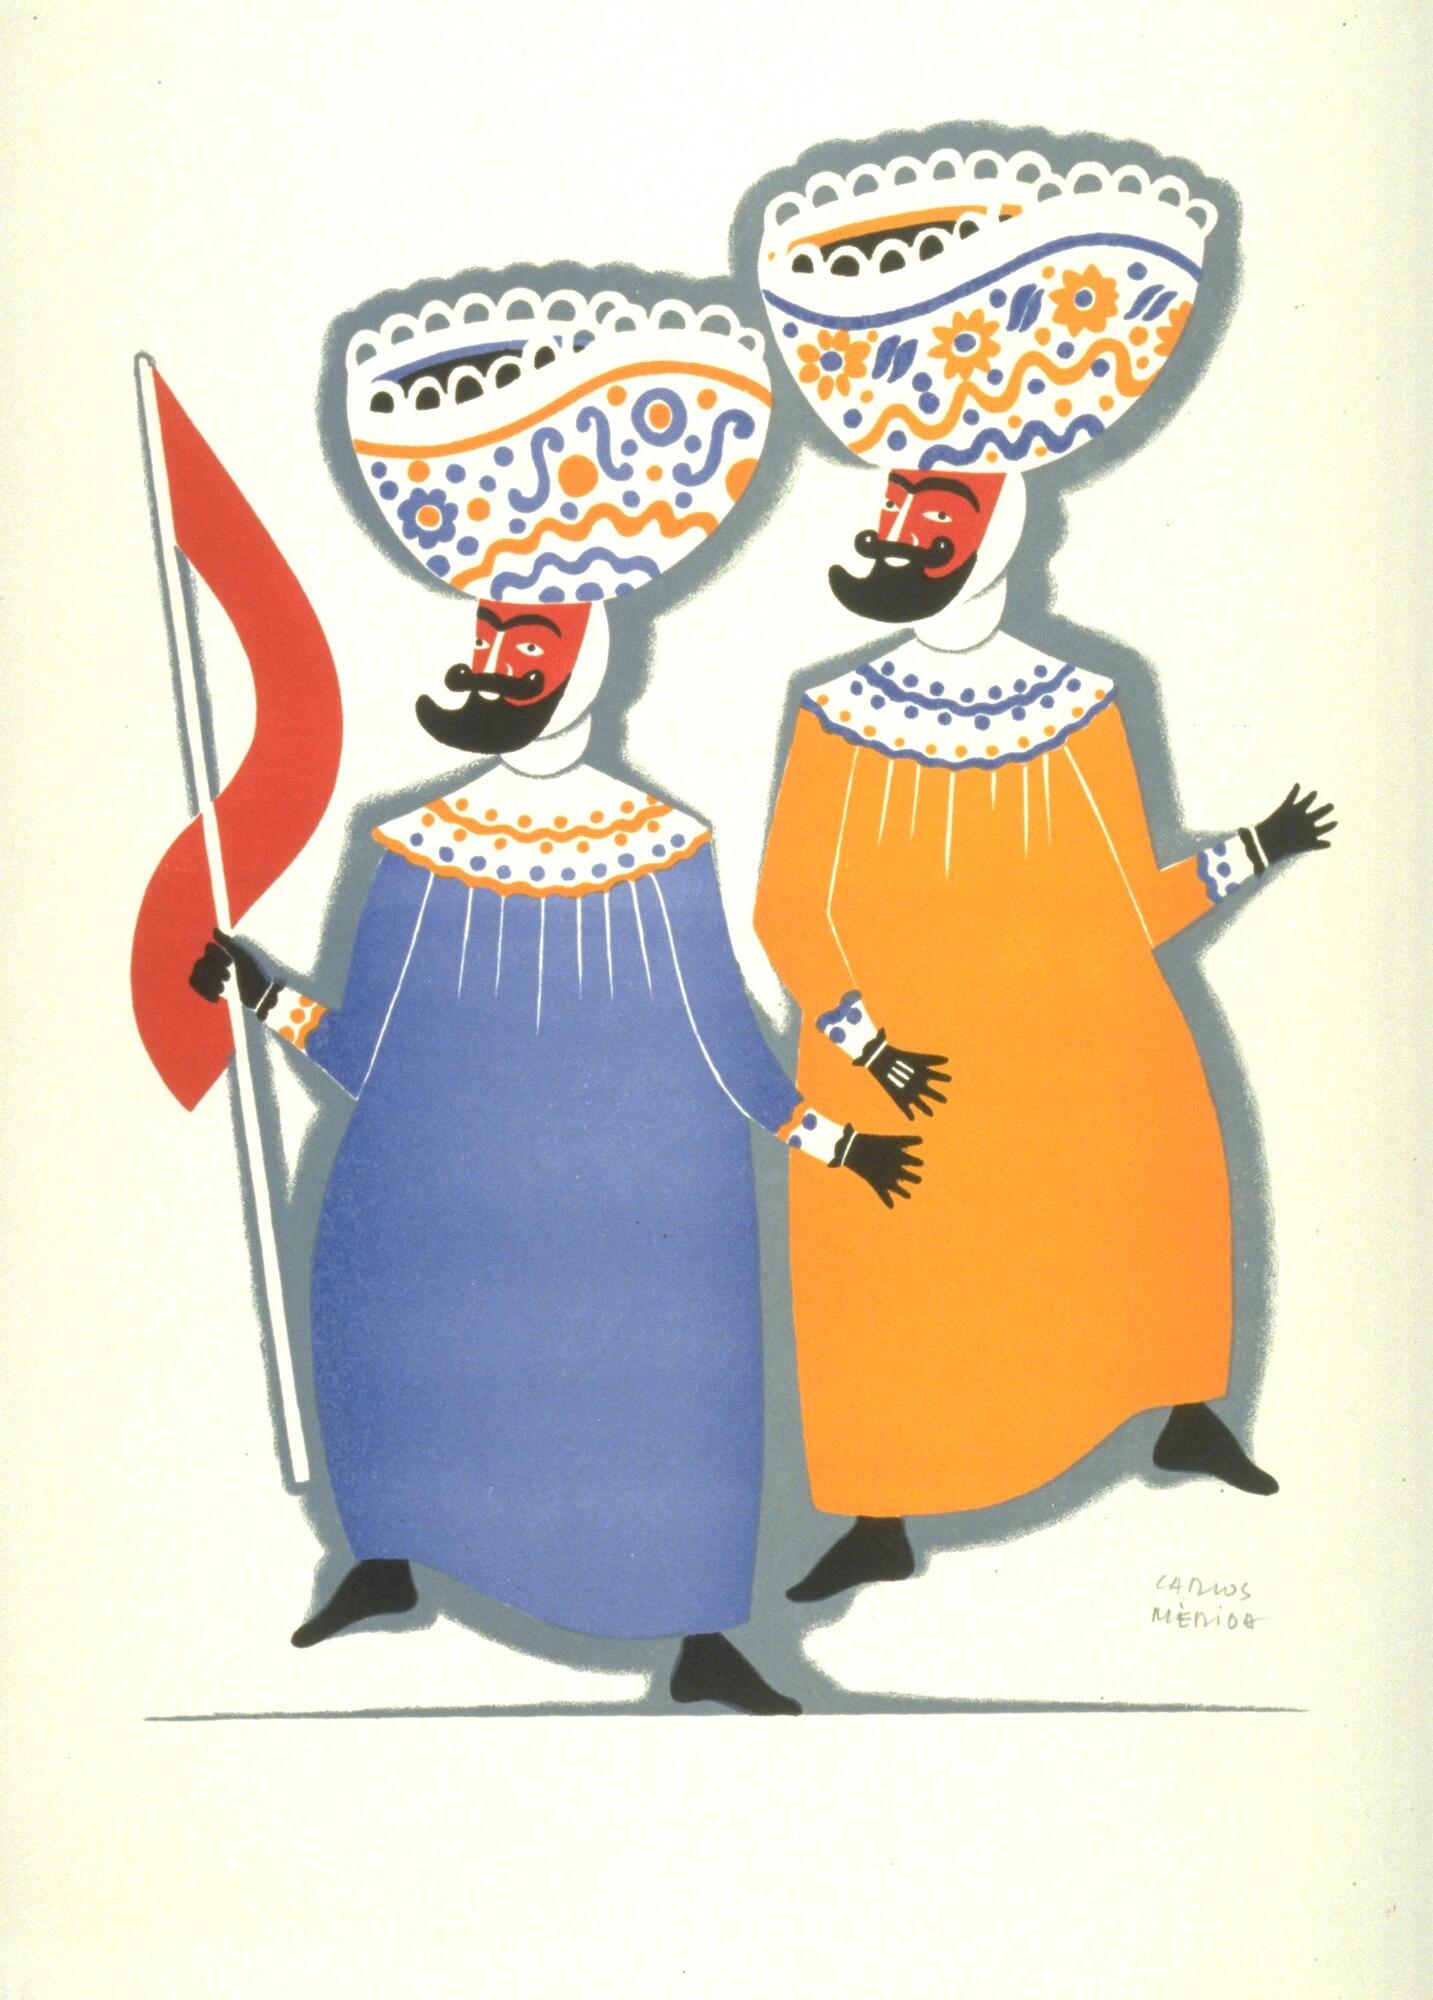 In this print, two figures are centered on the page. They both wear a red mask with a pronounced black beard and mustache. The figure on the right is in an orange-yellow gown with blue detail on the white lace trim and the figure on the left a blue gown, with orange-yellow details. Their gloves and shoes are both black. Both also wear white large hats that are bowl-shaped with white, blue, and yellow-orange lace motifs. The figure on the left carries a thin red flag on a white pole. 